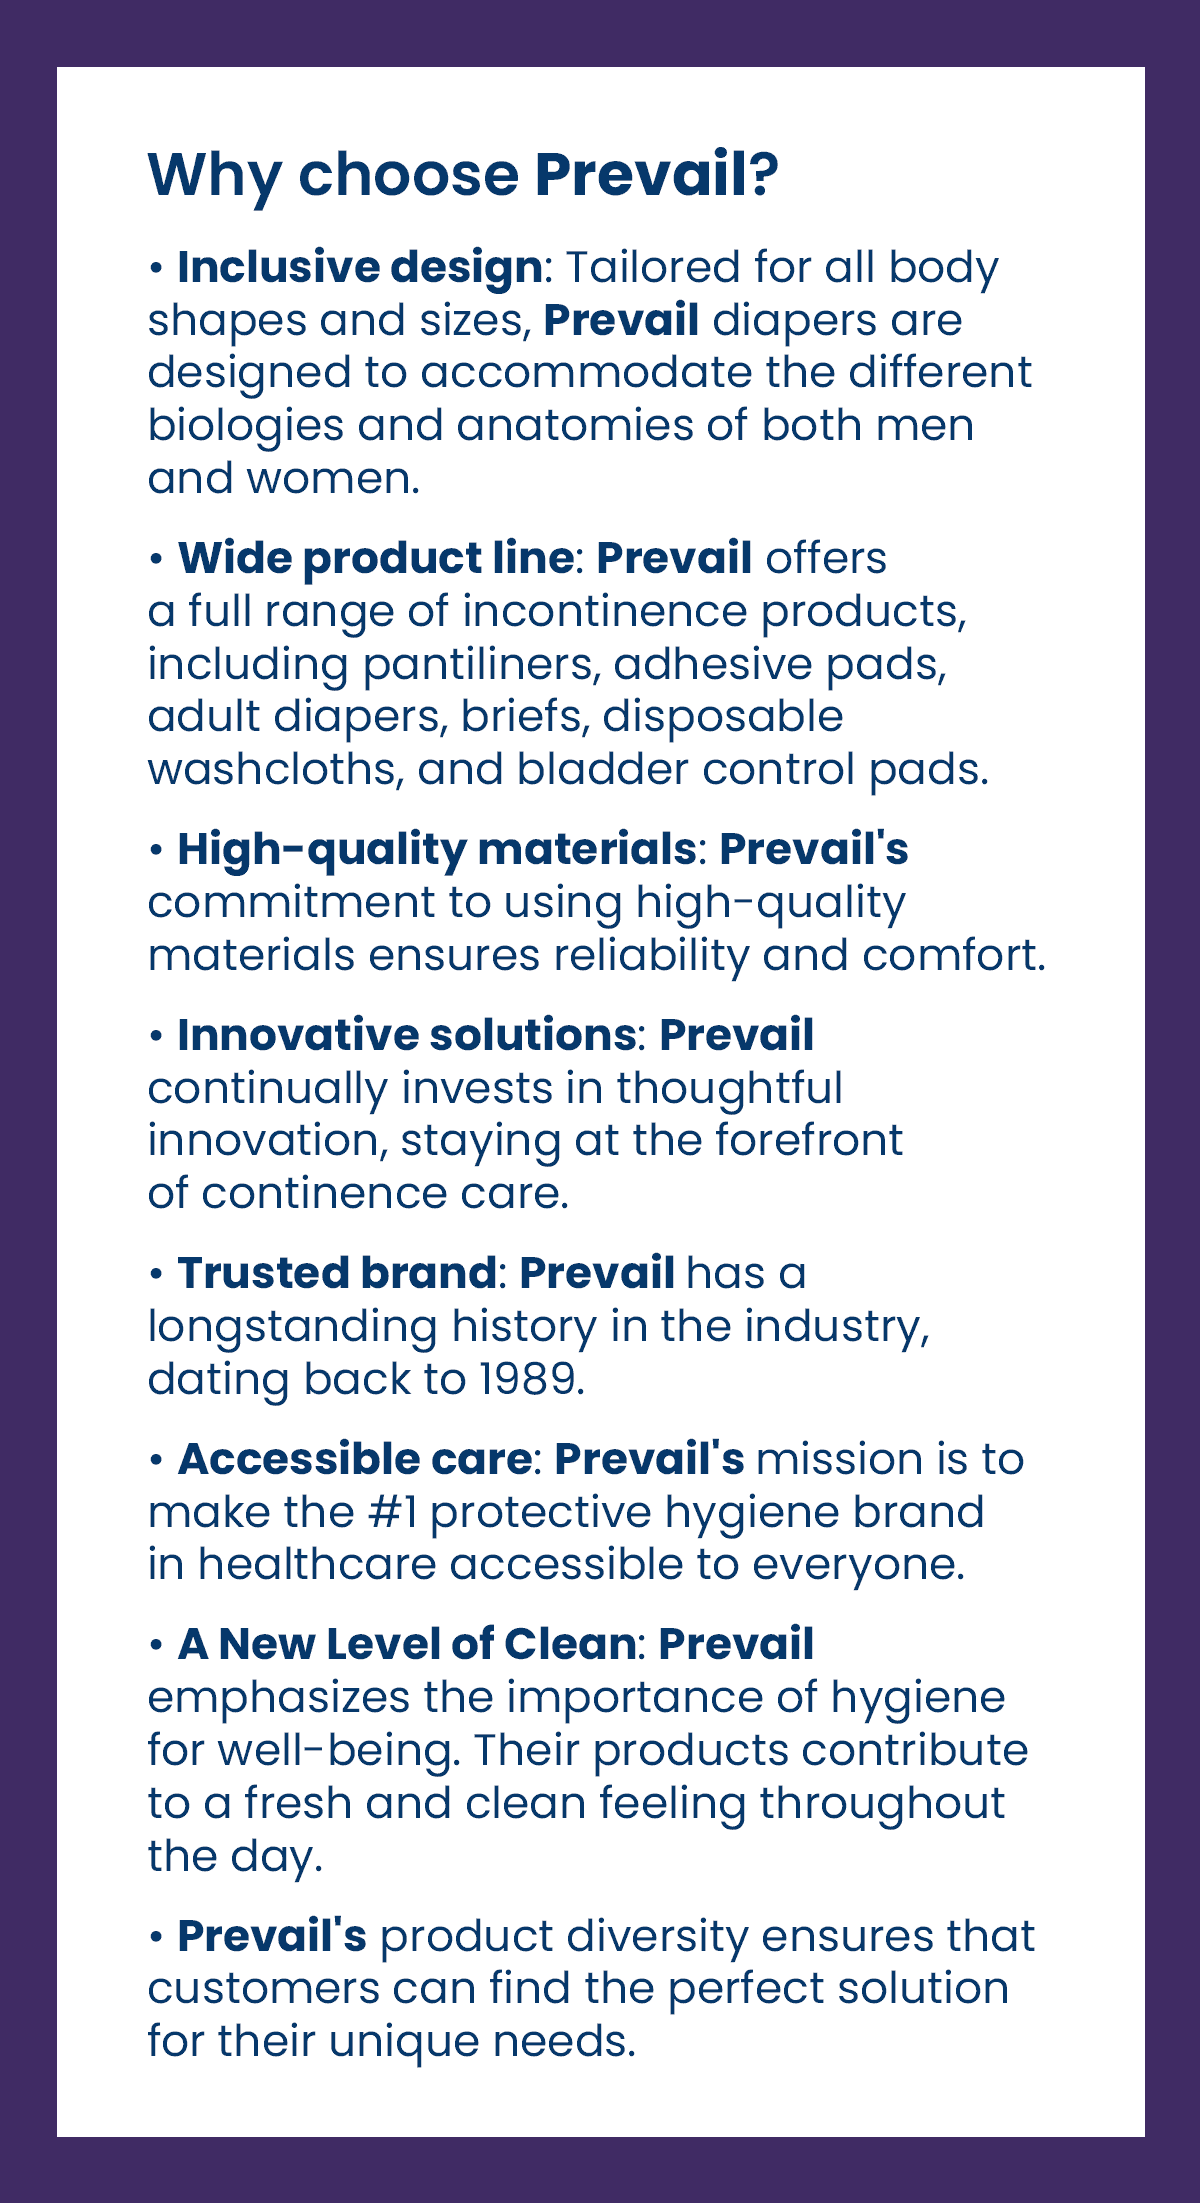 Why choose Prevail?